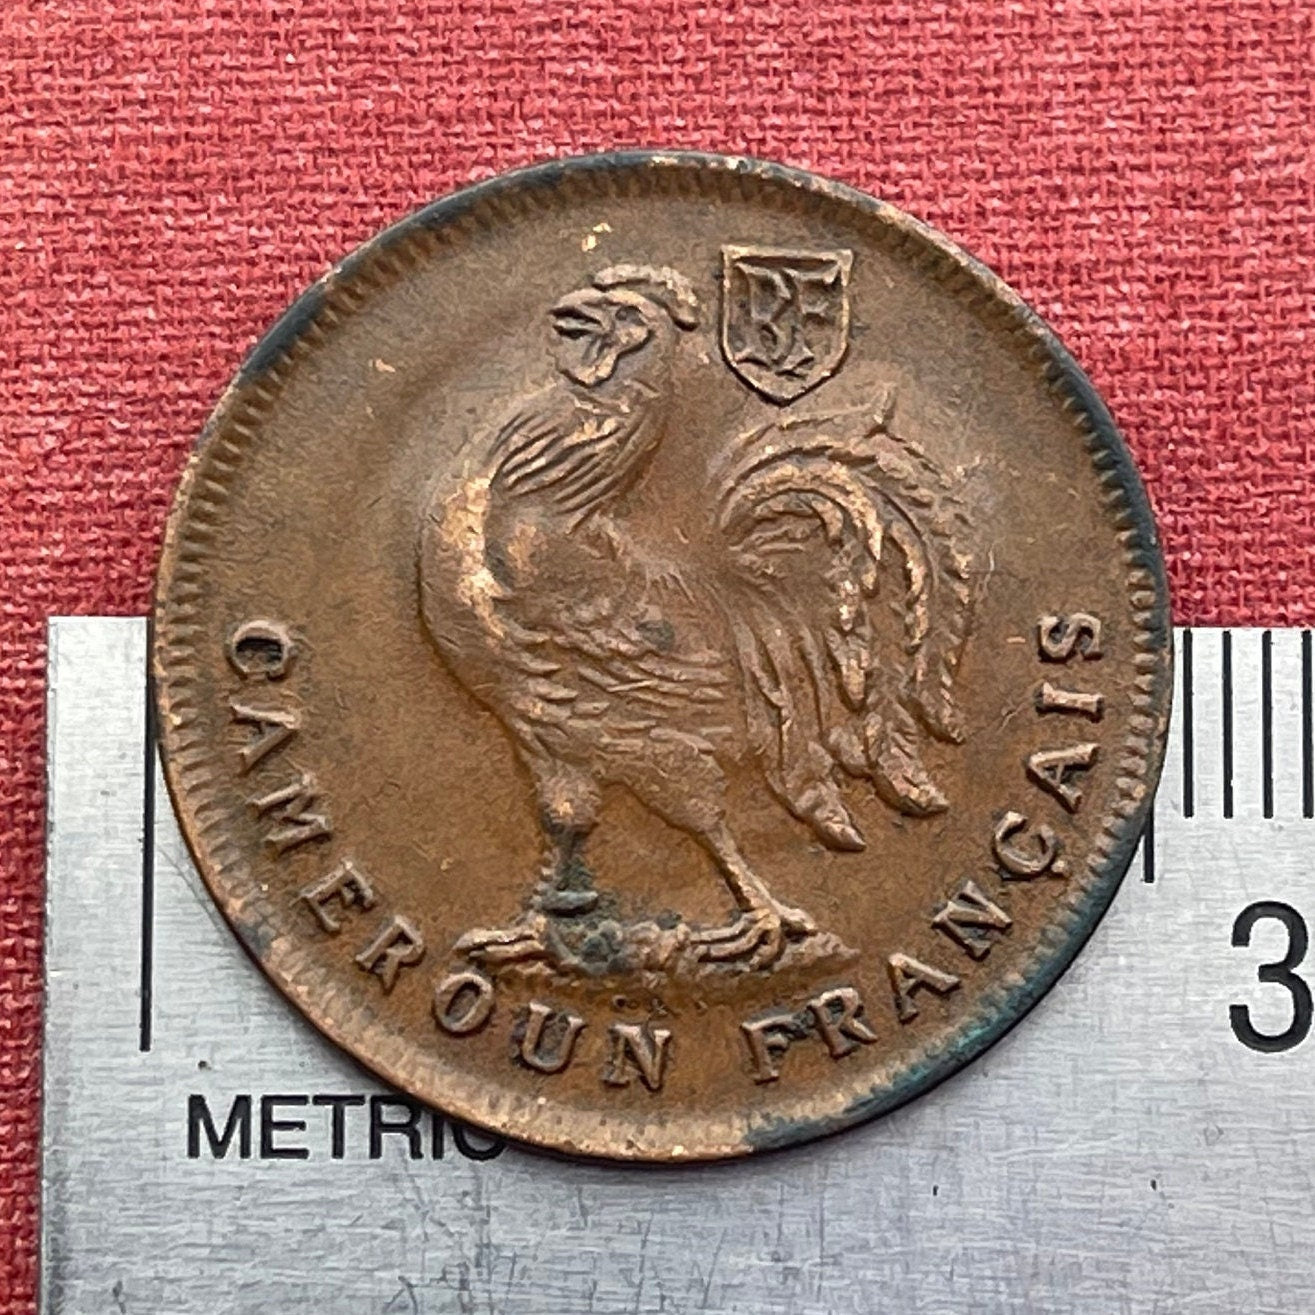 Free French Cross of Lorraine & Gallic Rooster Chantecler 1 Franc French Cameroon Authentic Coin Money for Jewelry (Le Coq Francais) 1943